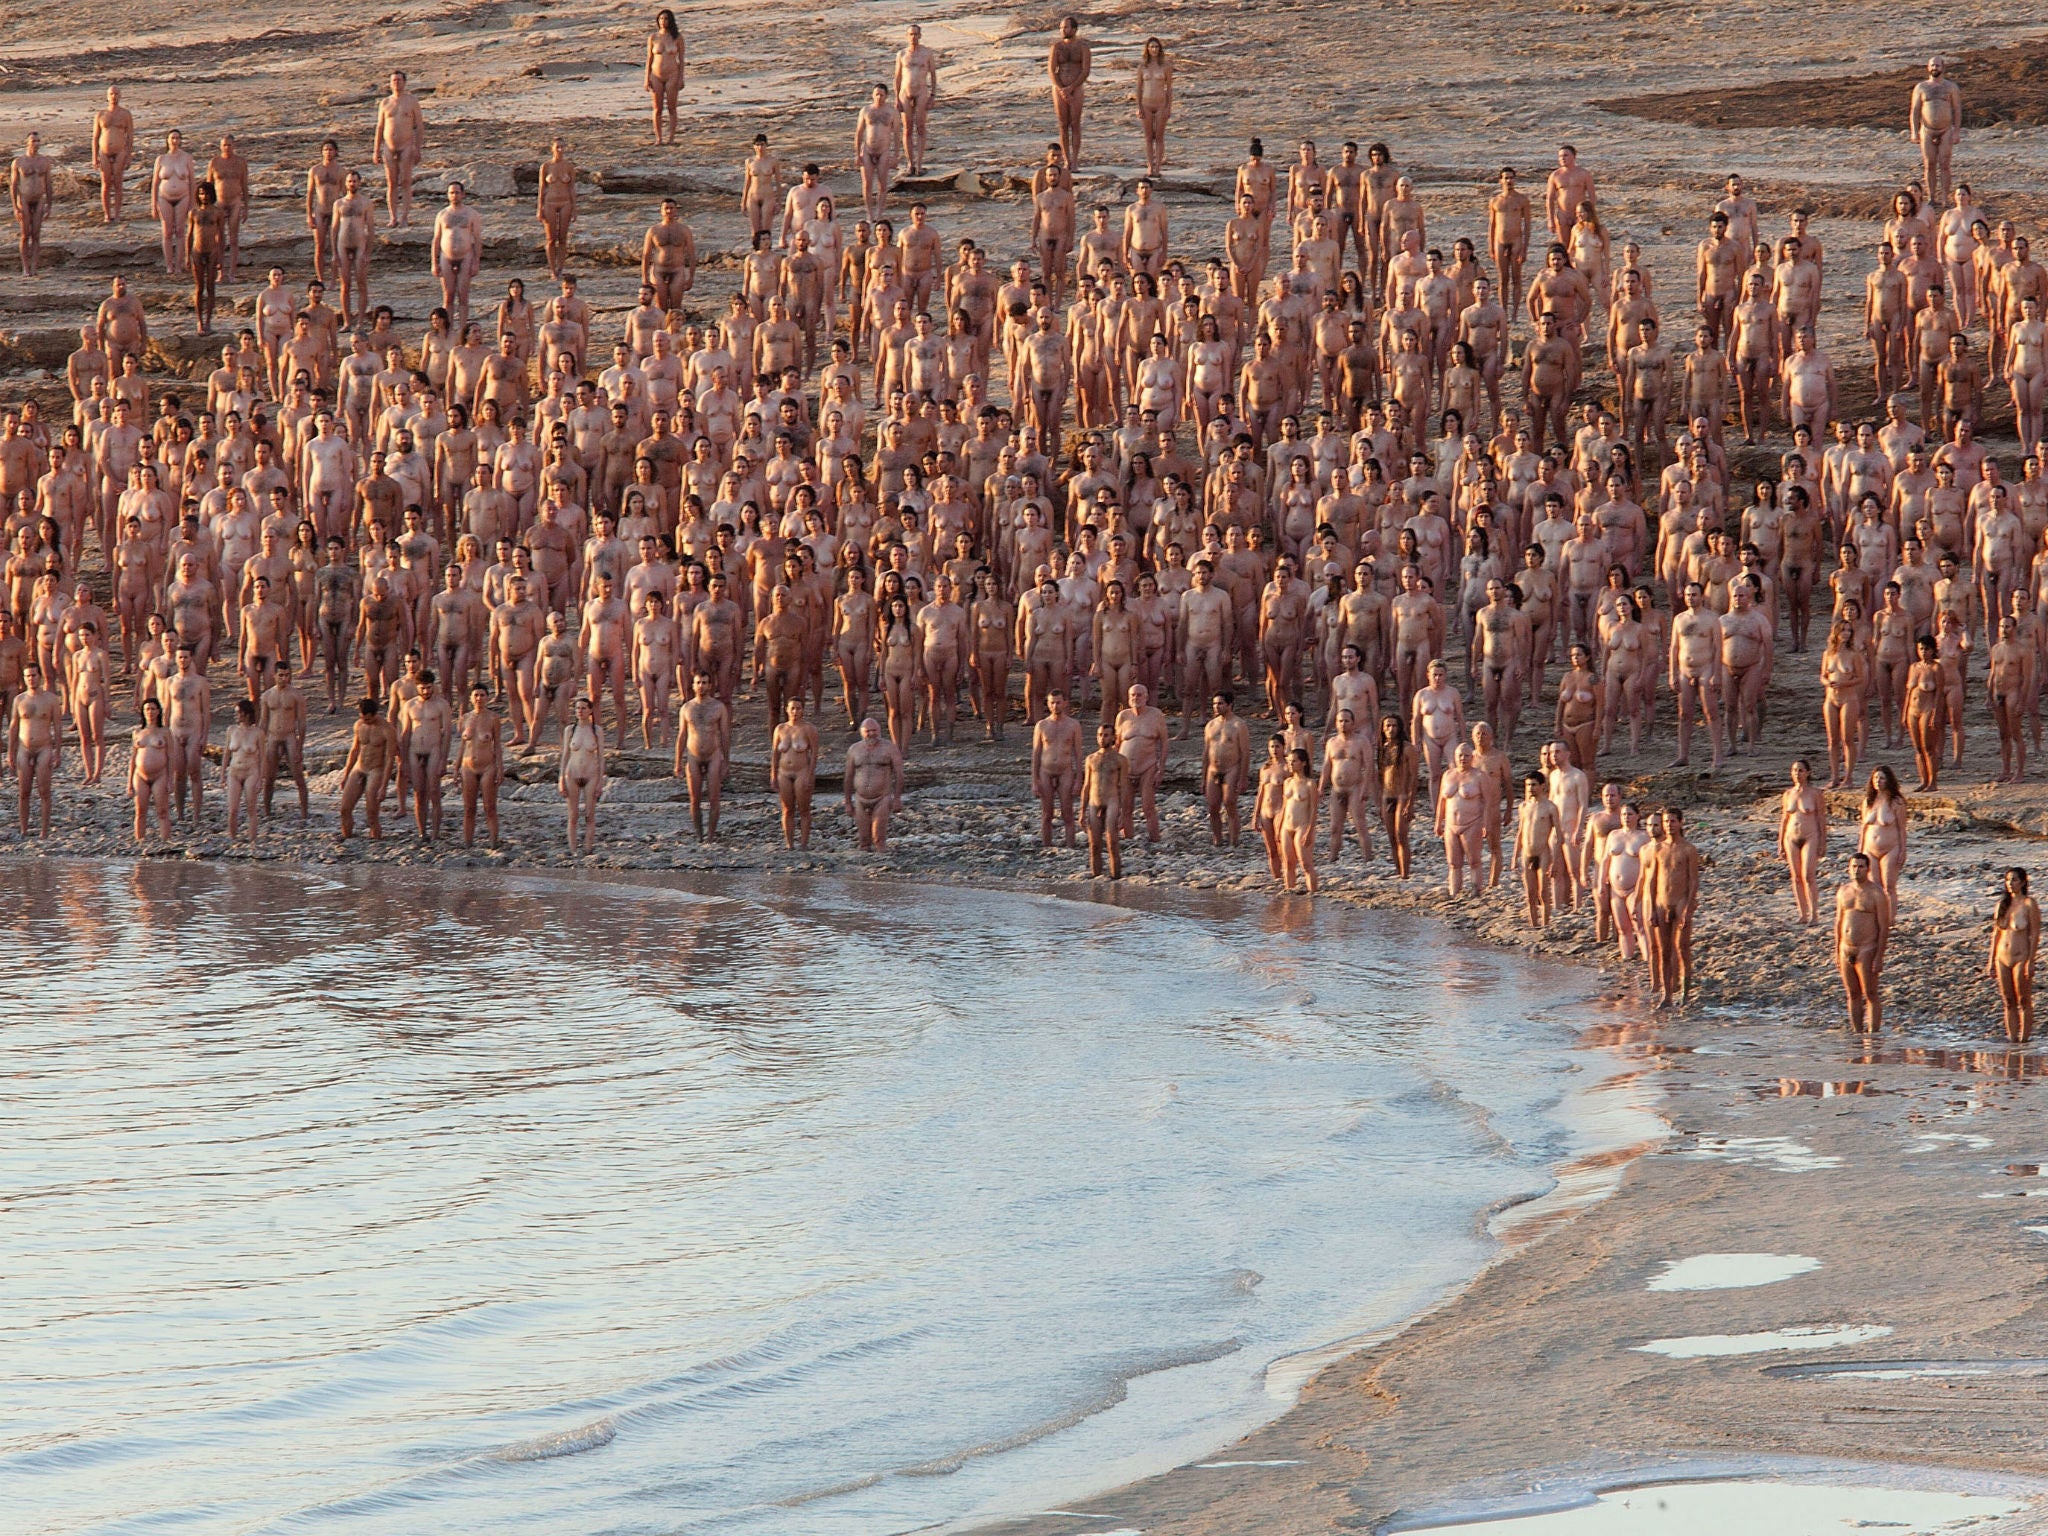 More than 1,000 nude Israelis pose for US photographer Spencer Tunick's first Middle East mass shoot in 2011